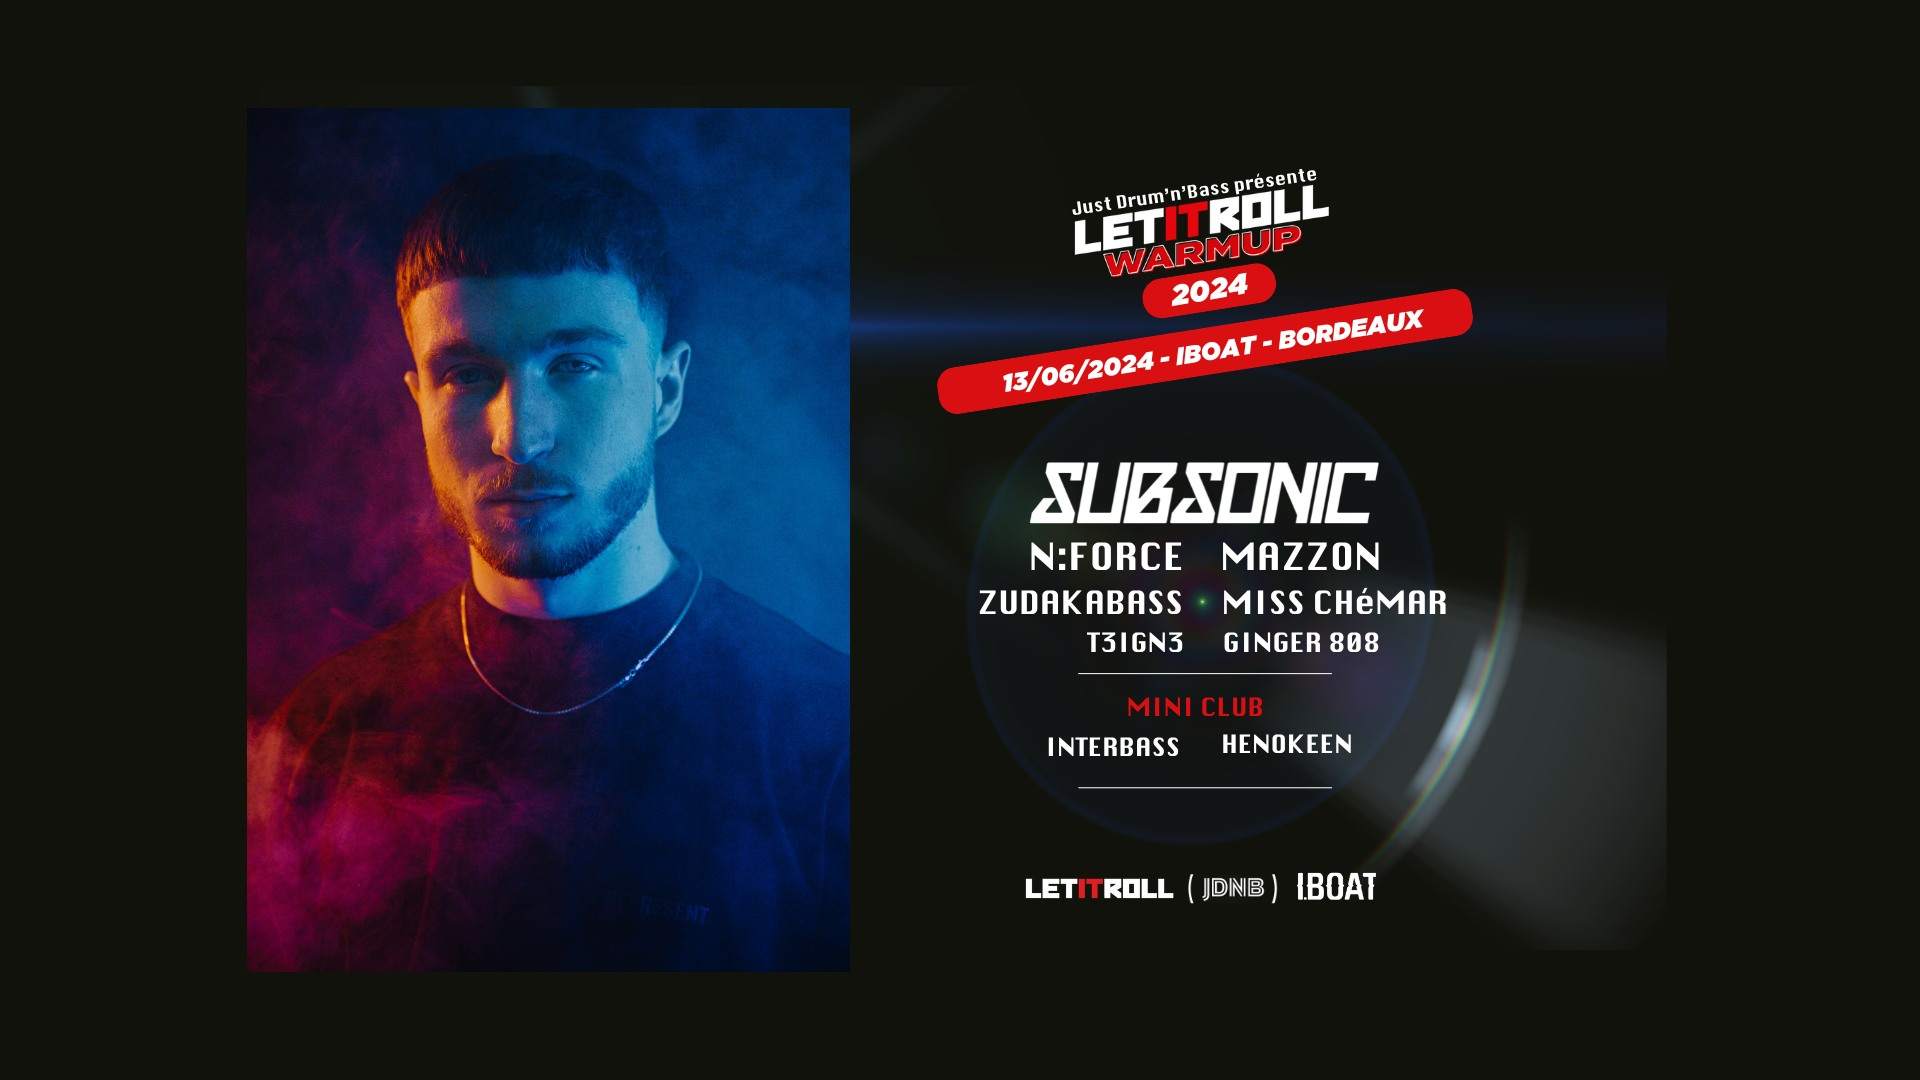 Let It Roll warm up: Subsonic, N:FORCE, MAZZON - Página frontal